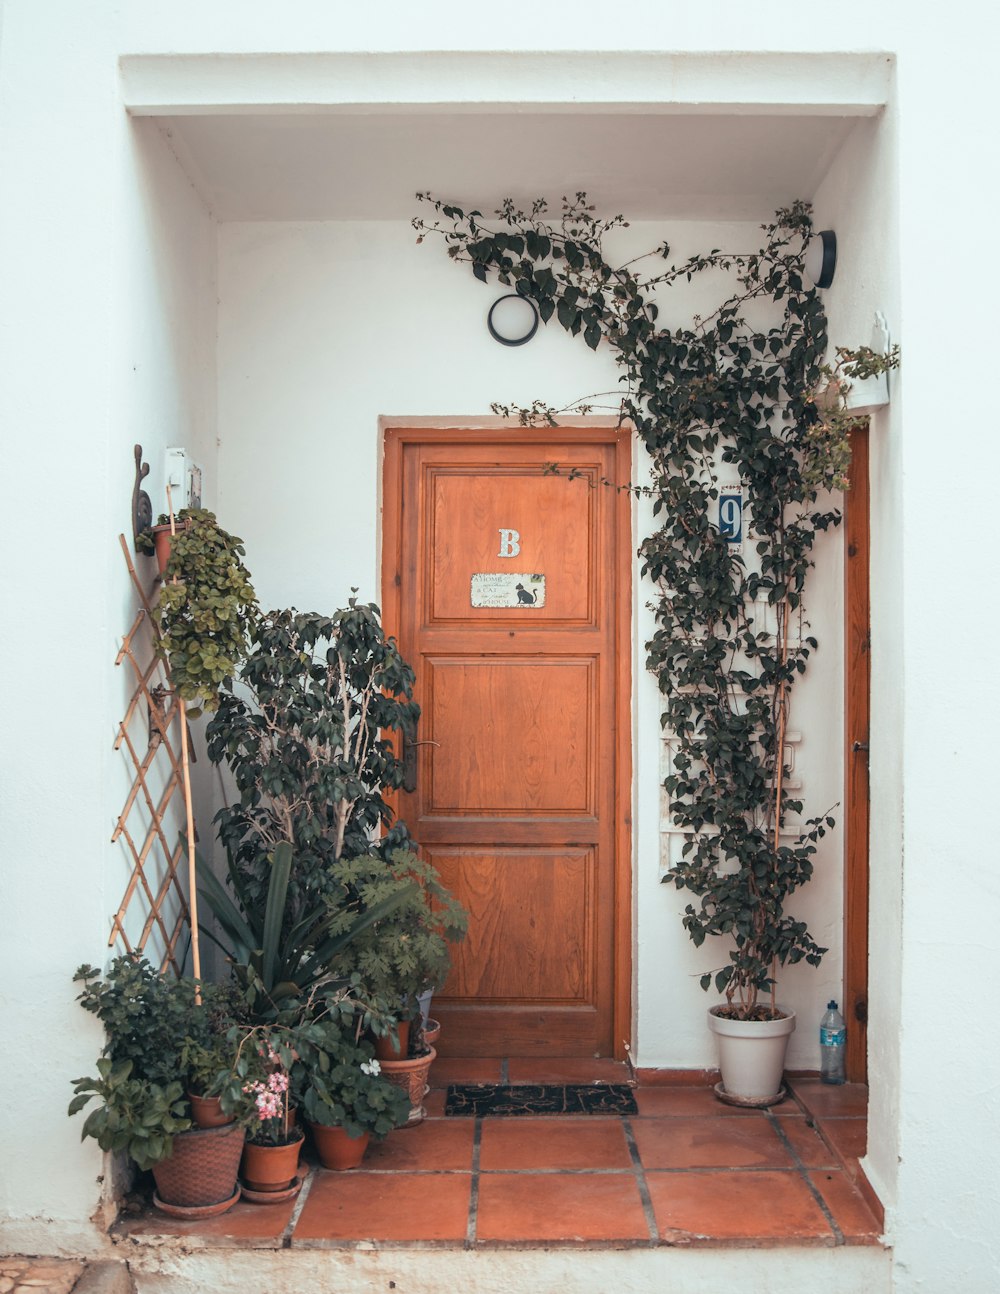 a wooden door surrounded by potted plants